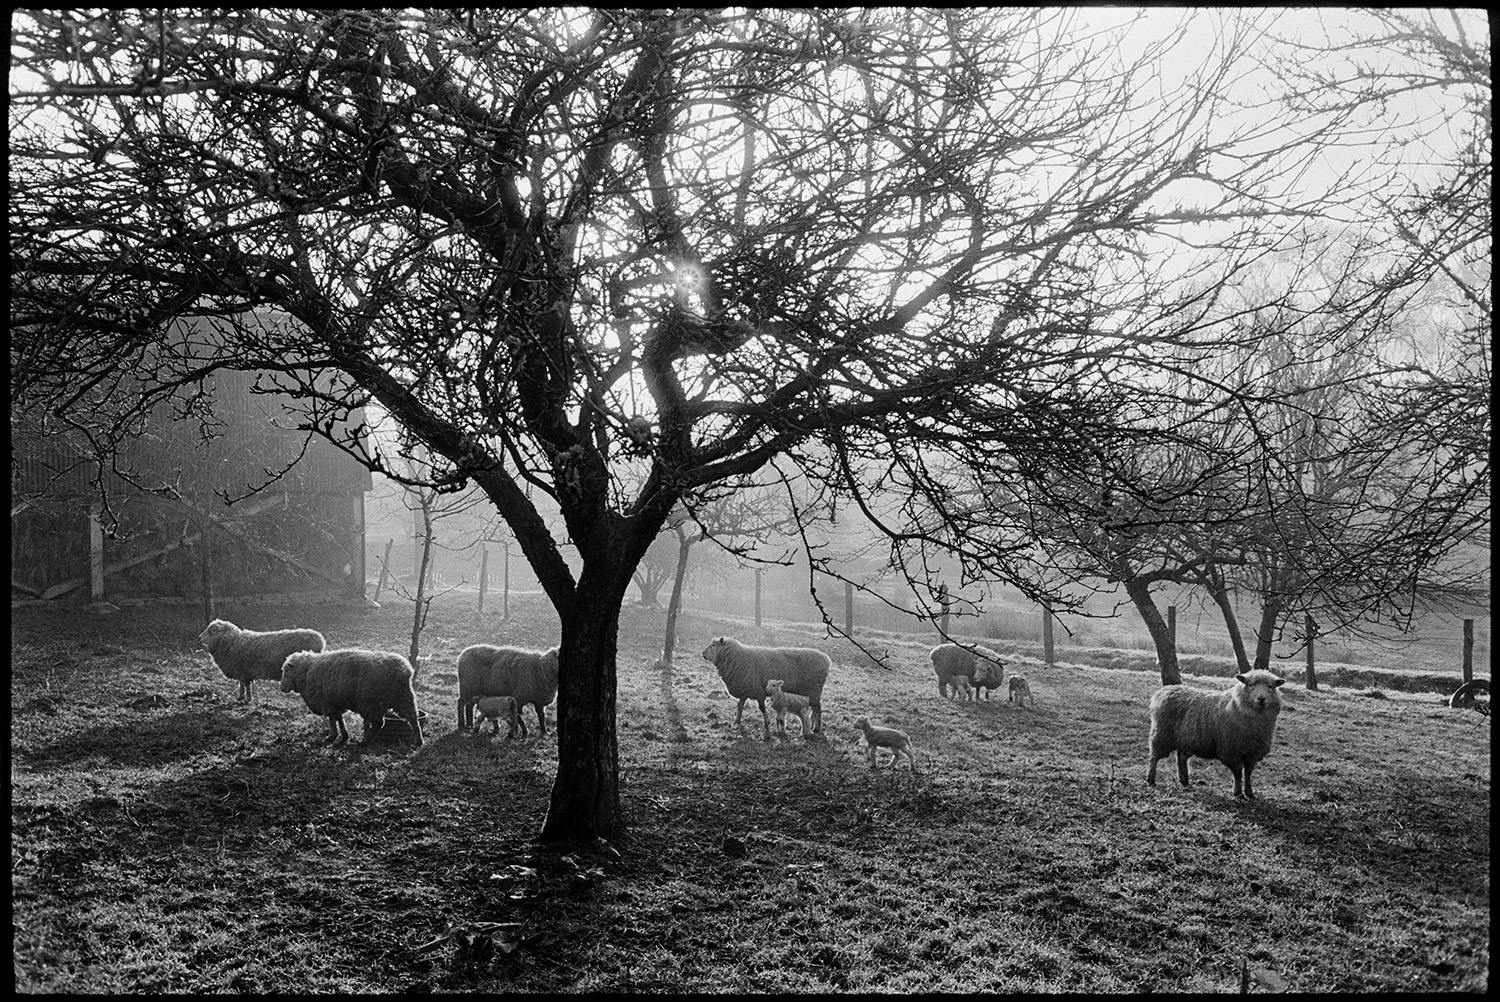 Sheep in orchard, farmyard and bottle feeding lamb in barn.
[Ewes and lambs in an orchard at Lower Langham, Dolton. Sun is shining through the apple trees, one of which is silhouetted in the foreground.]